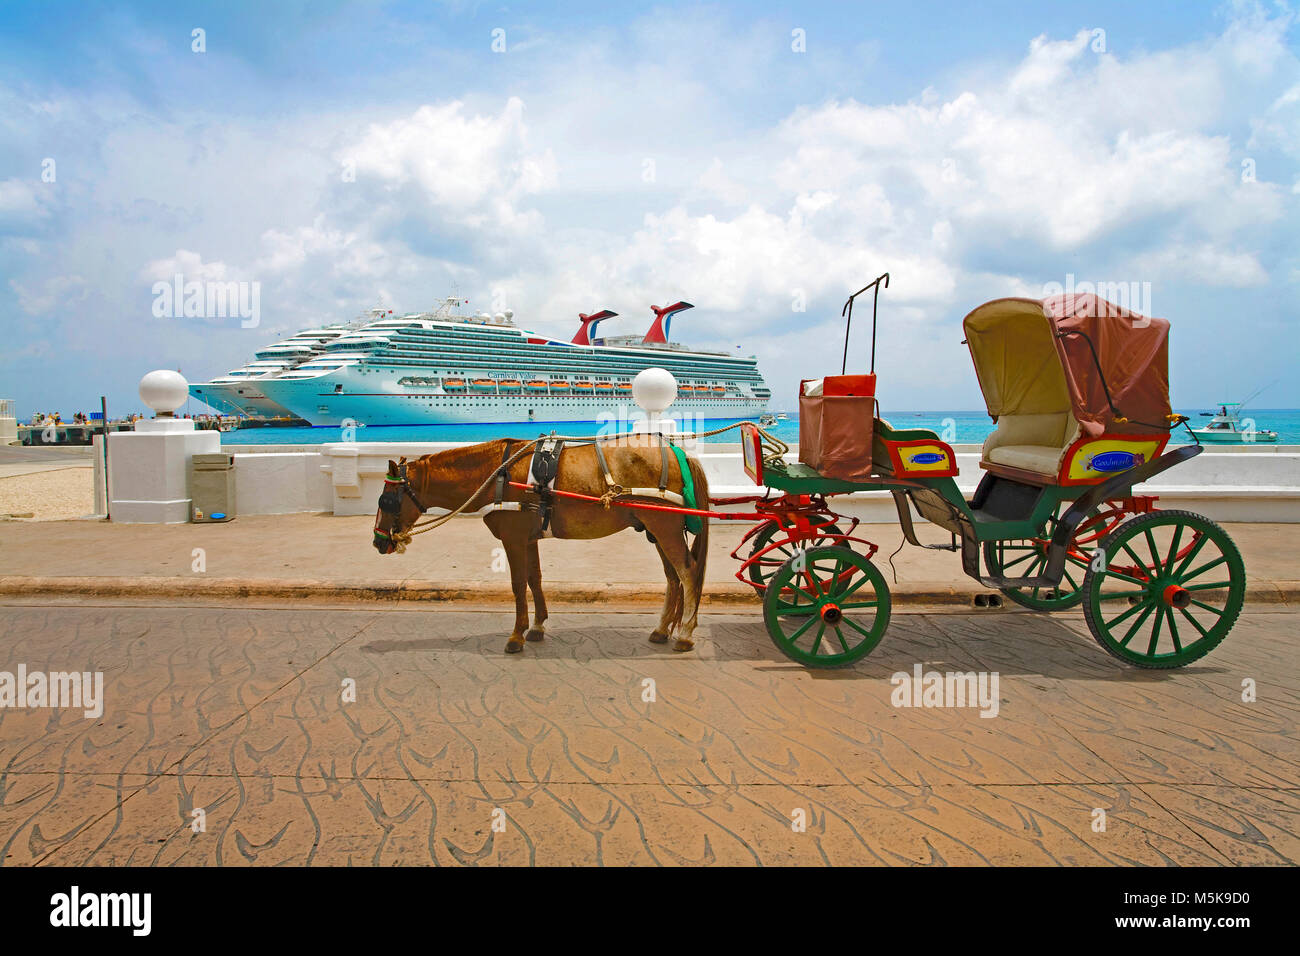 Horse-drawn carriage waiting on street for tourists, cruise liner at the terminal, Carnival Valor, Carnival Conquest, Cozumel, Mexico, Caribbean Stock Photo